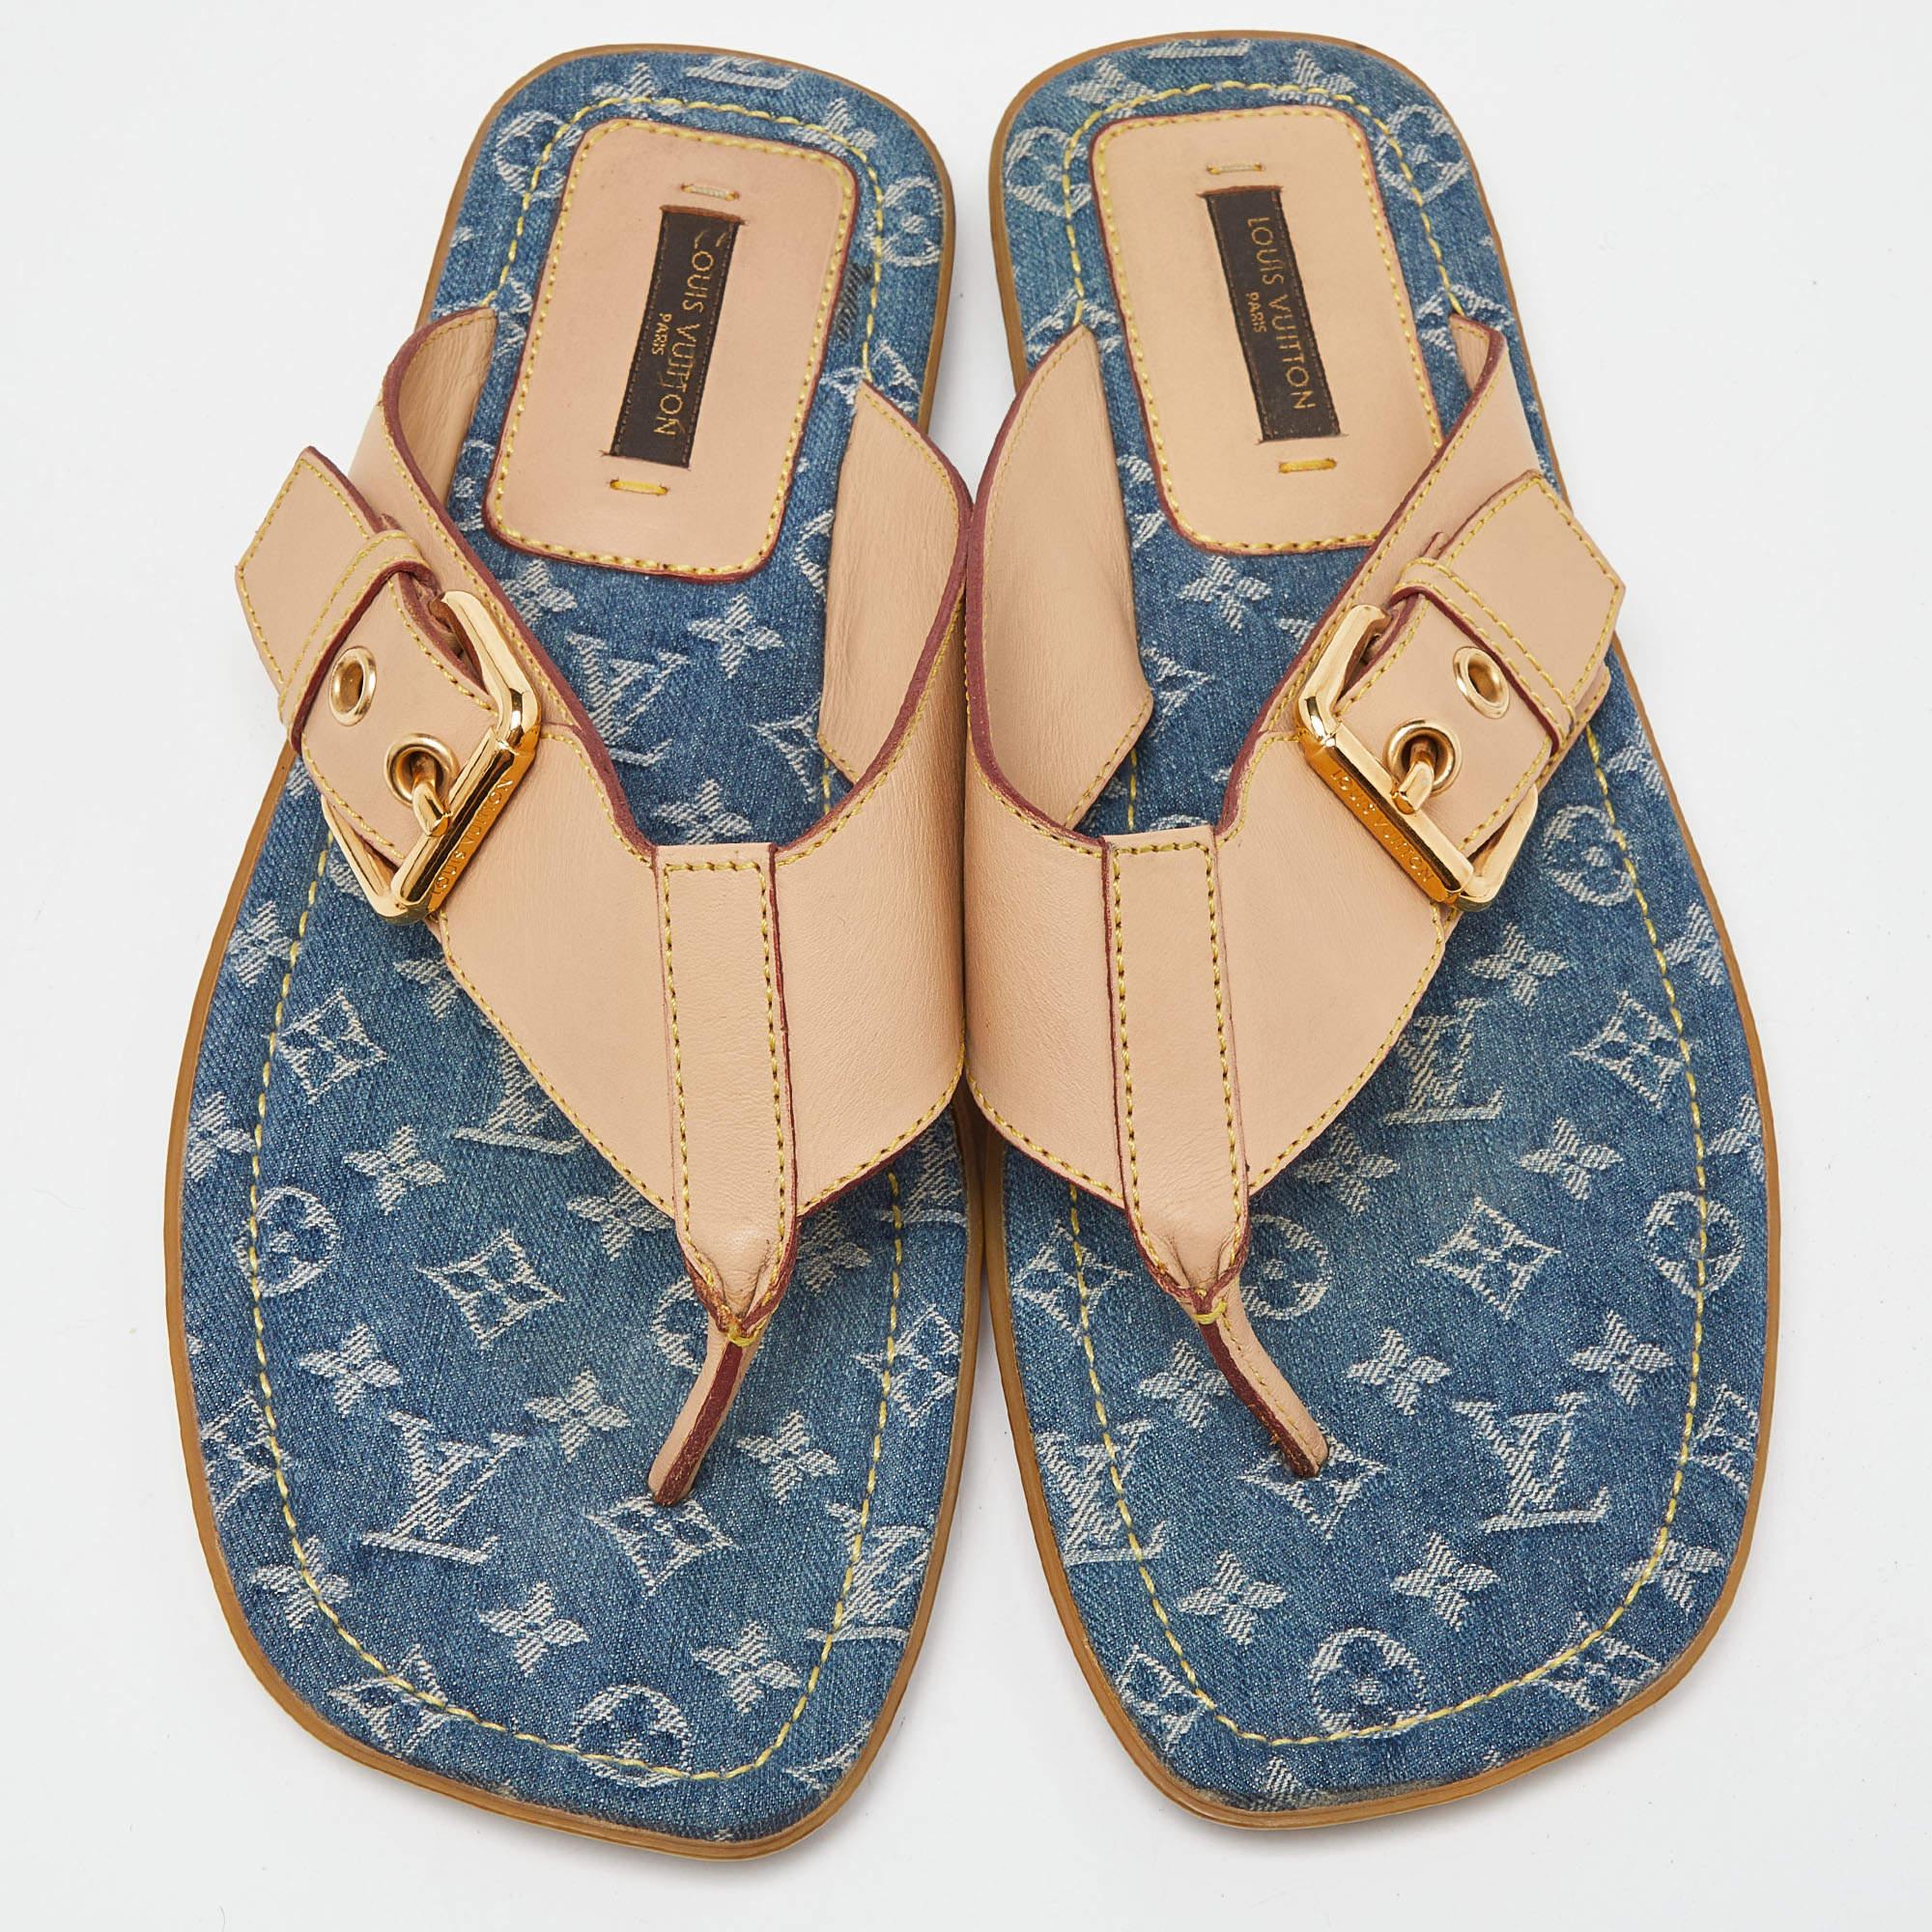 Frame your feet with these LV flat sandals. Created using the best materials, the flats are perfect with short, midi, and maxi hemlines.

